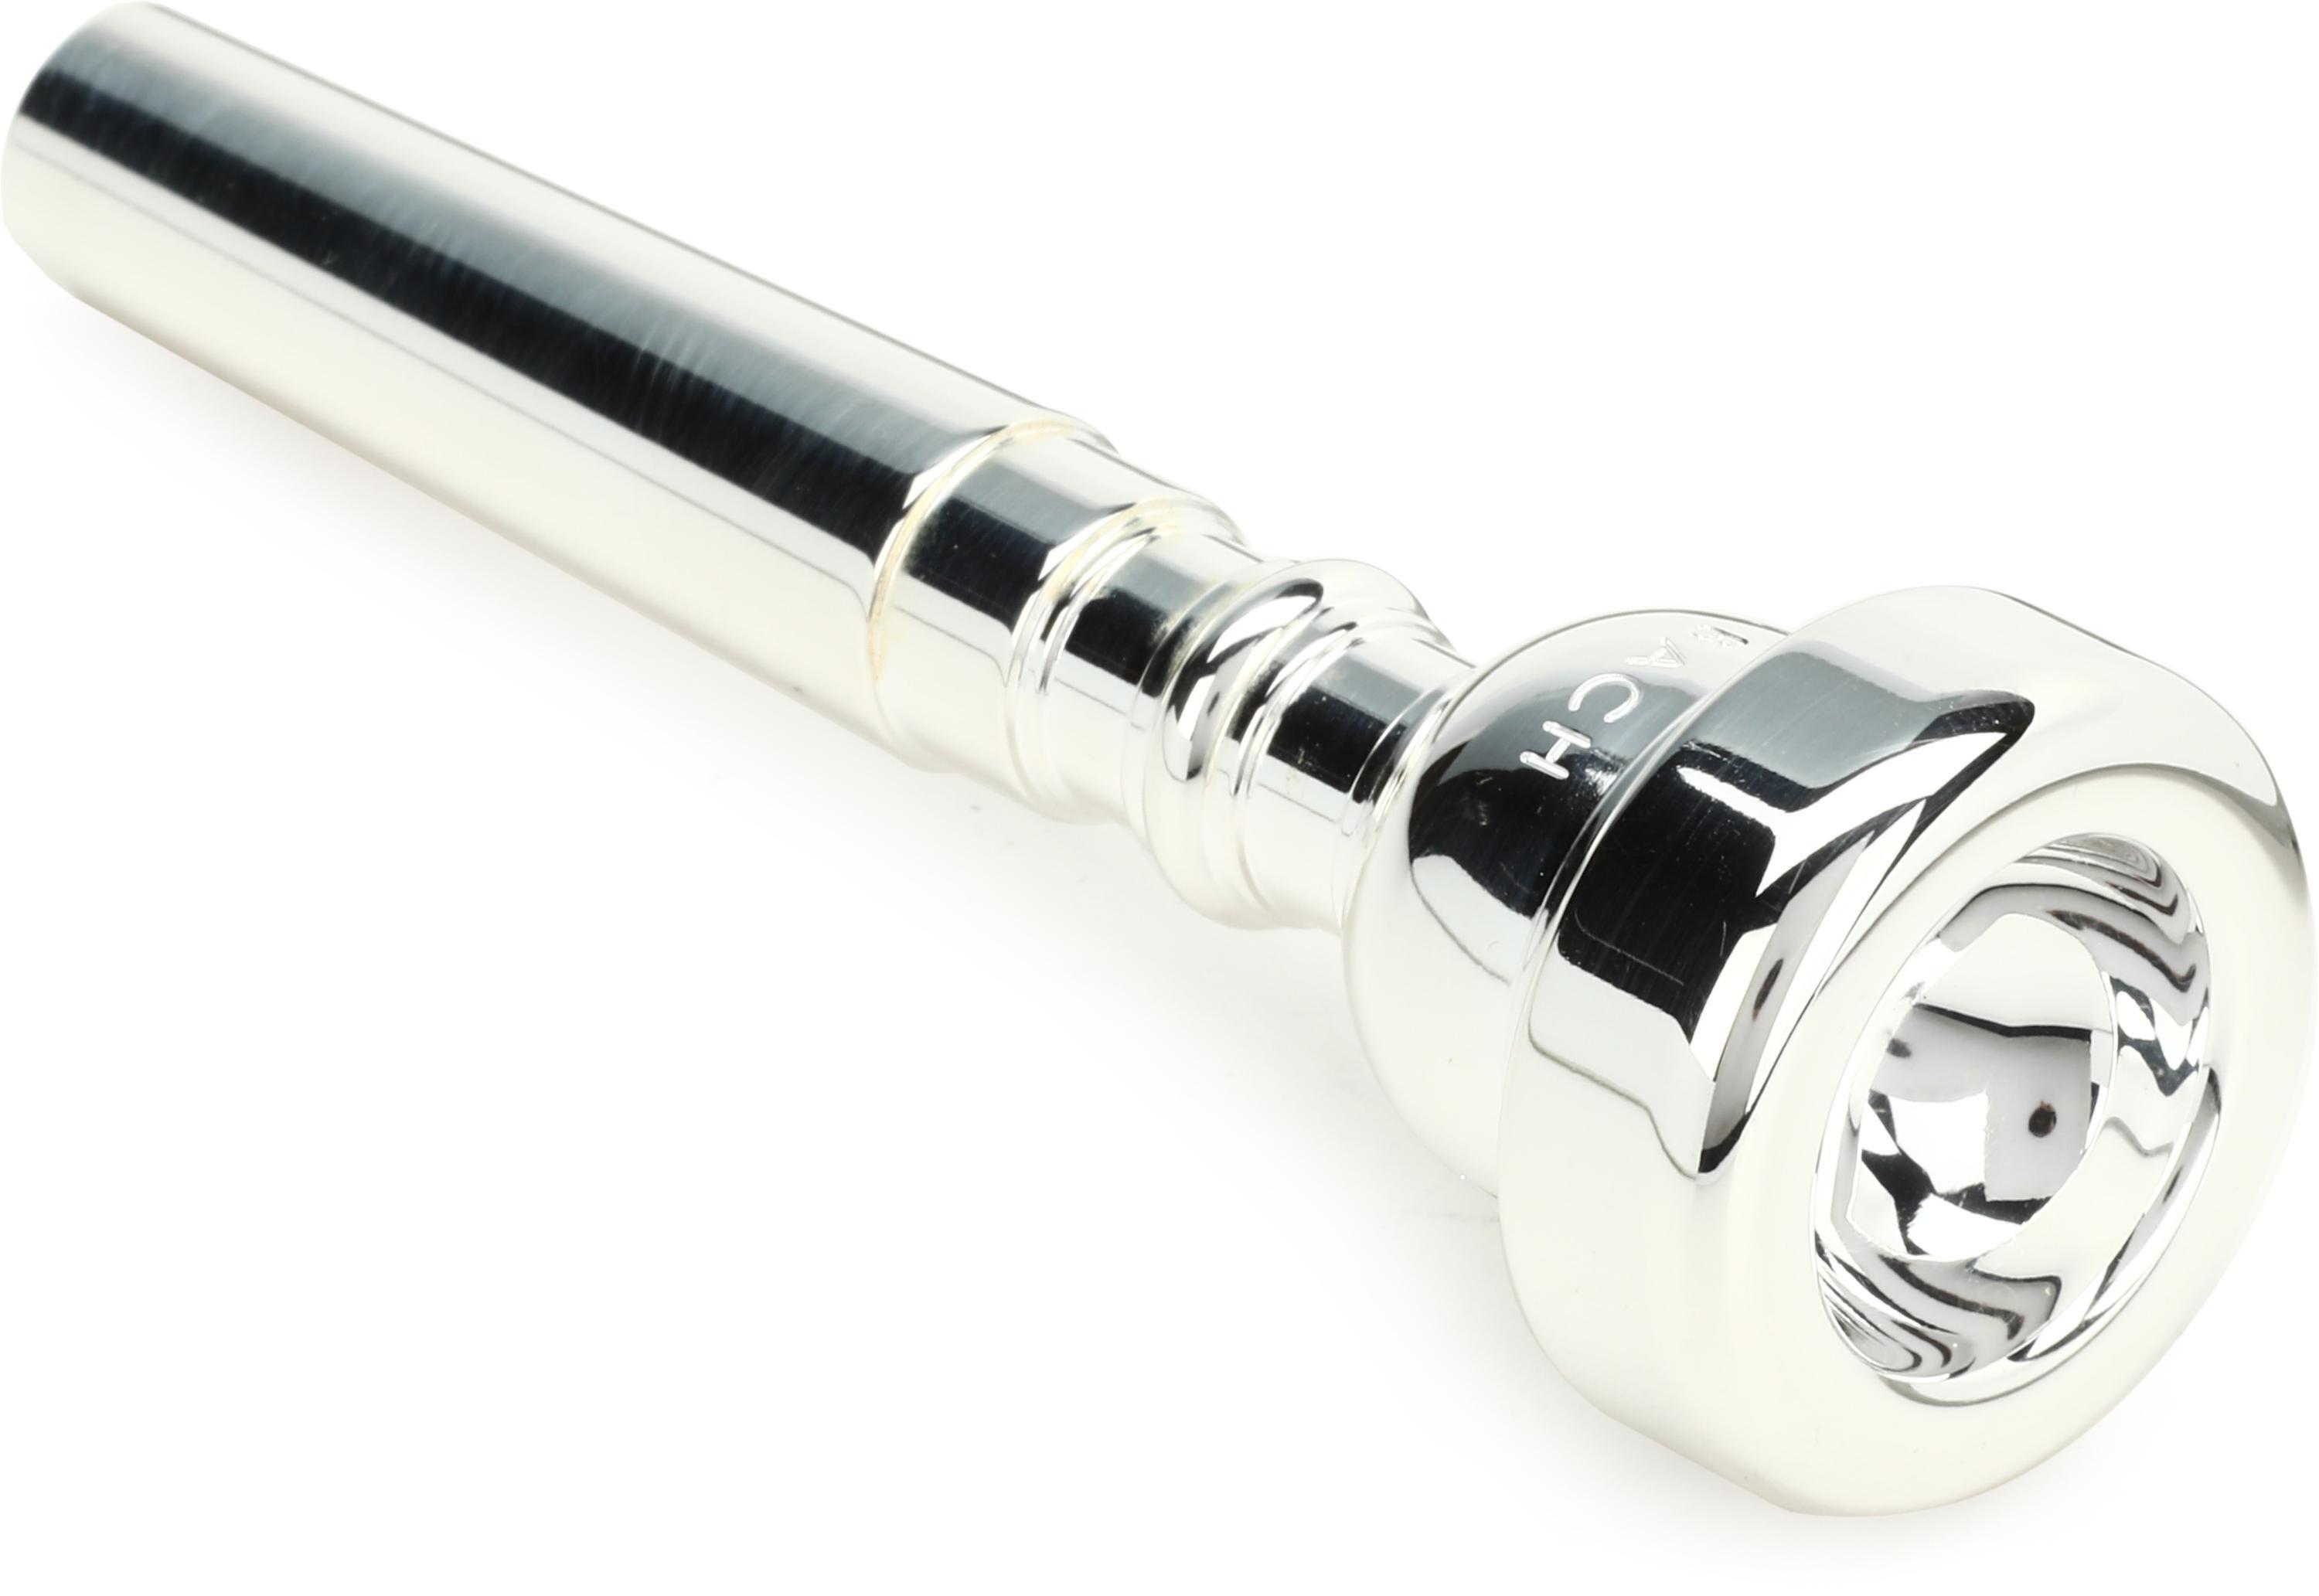 Bach S651 Symphonic Series Trumpet Mouthpiece - 1.5C with Throat #24